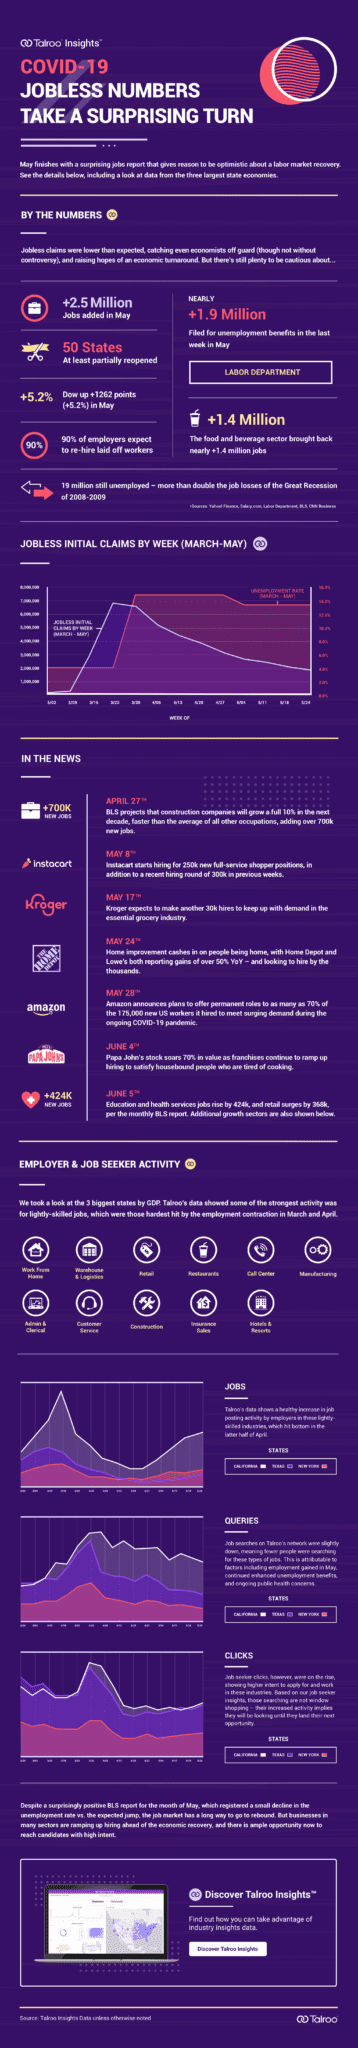 Talroo Jobless Number Infographic May 2020